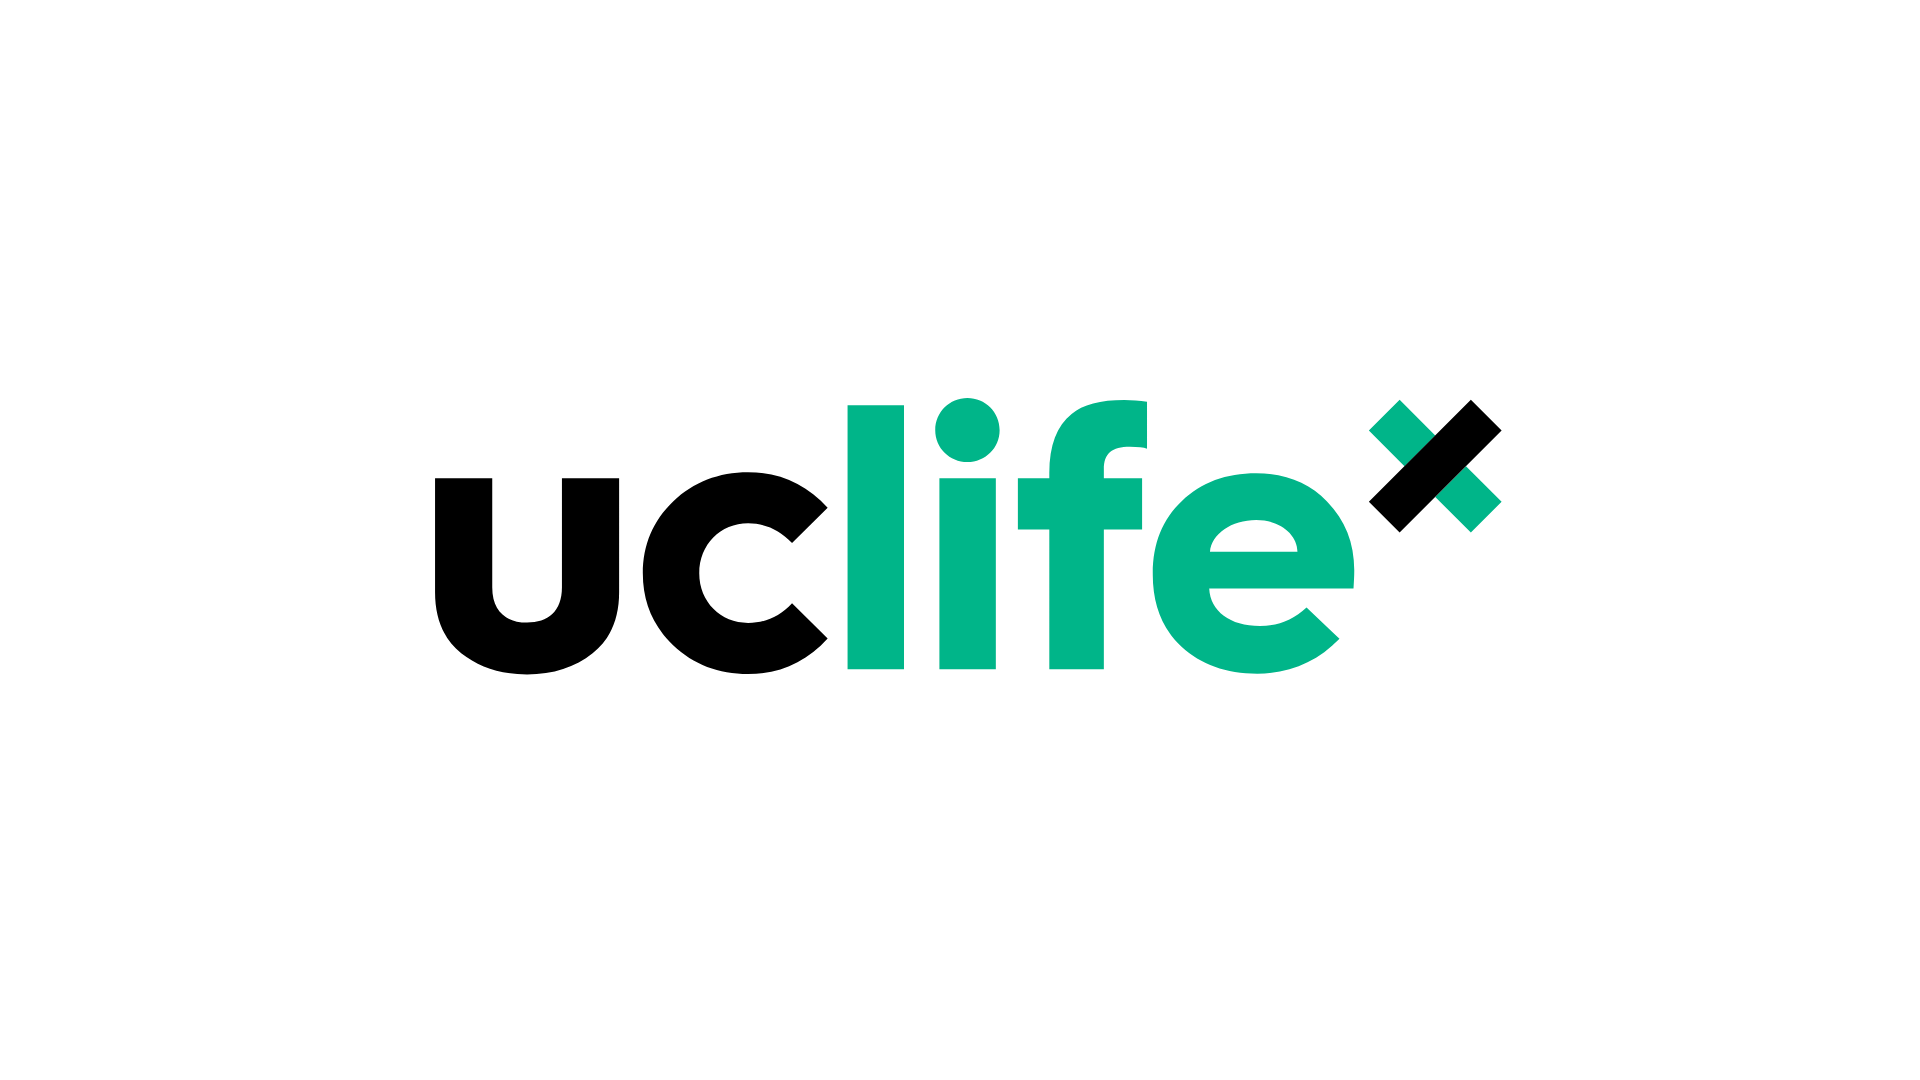 The word 'UCLifex' appears as a logo. The 'UC' portion appears in black while the 'life' portion appears in green. The 'x' is indexed above the 'e' of life and is both black and green. 